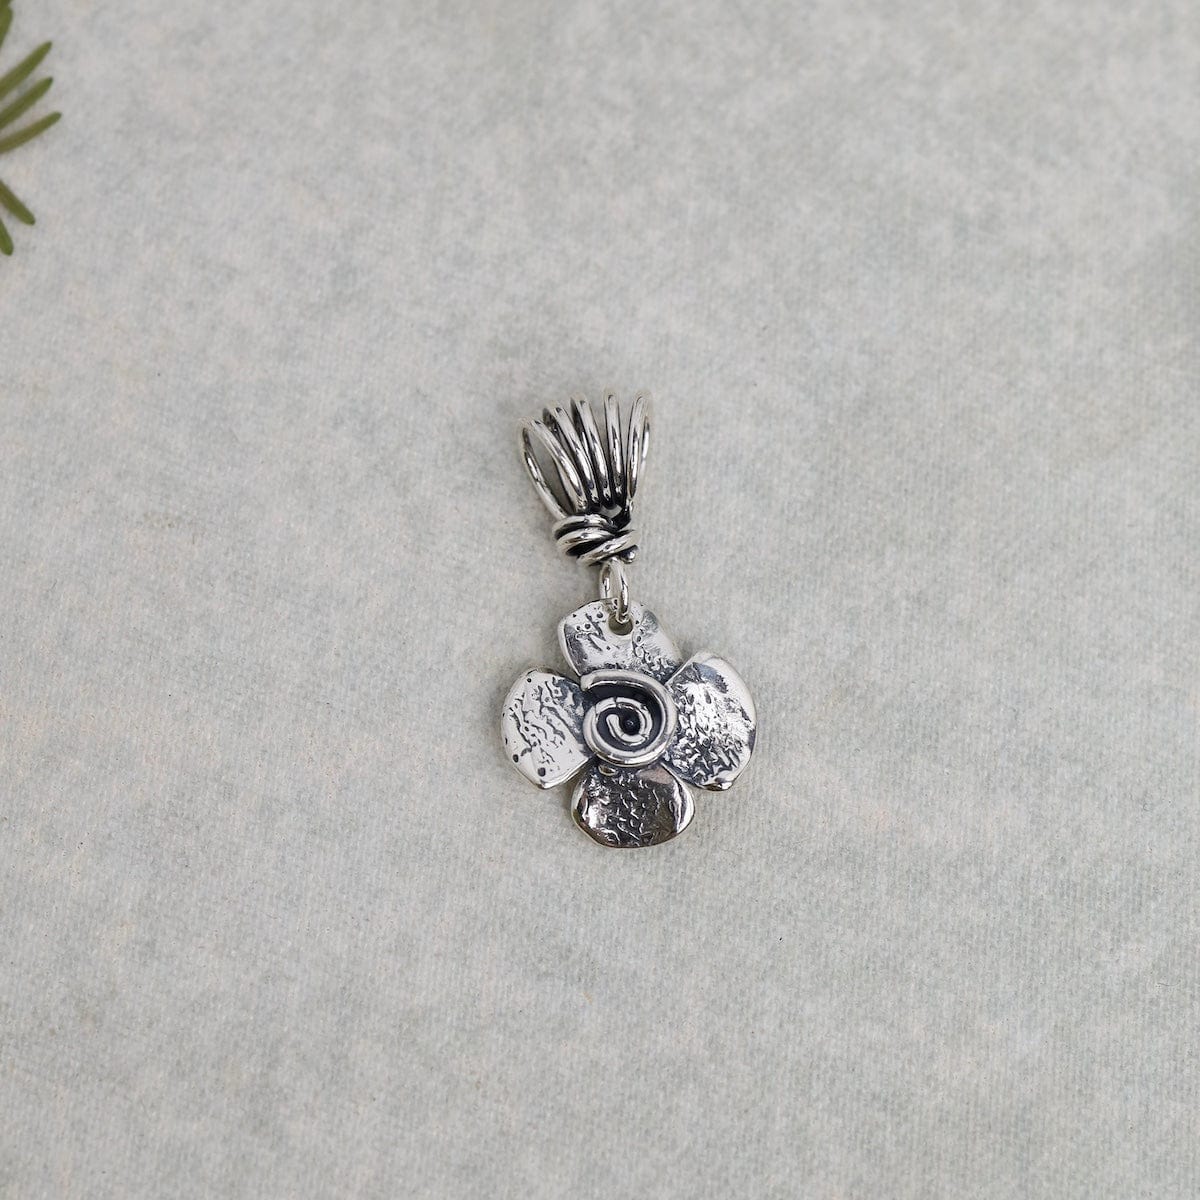 PND Two Sided Flower Pendant with Spiral on the Other